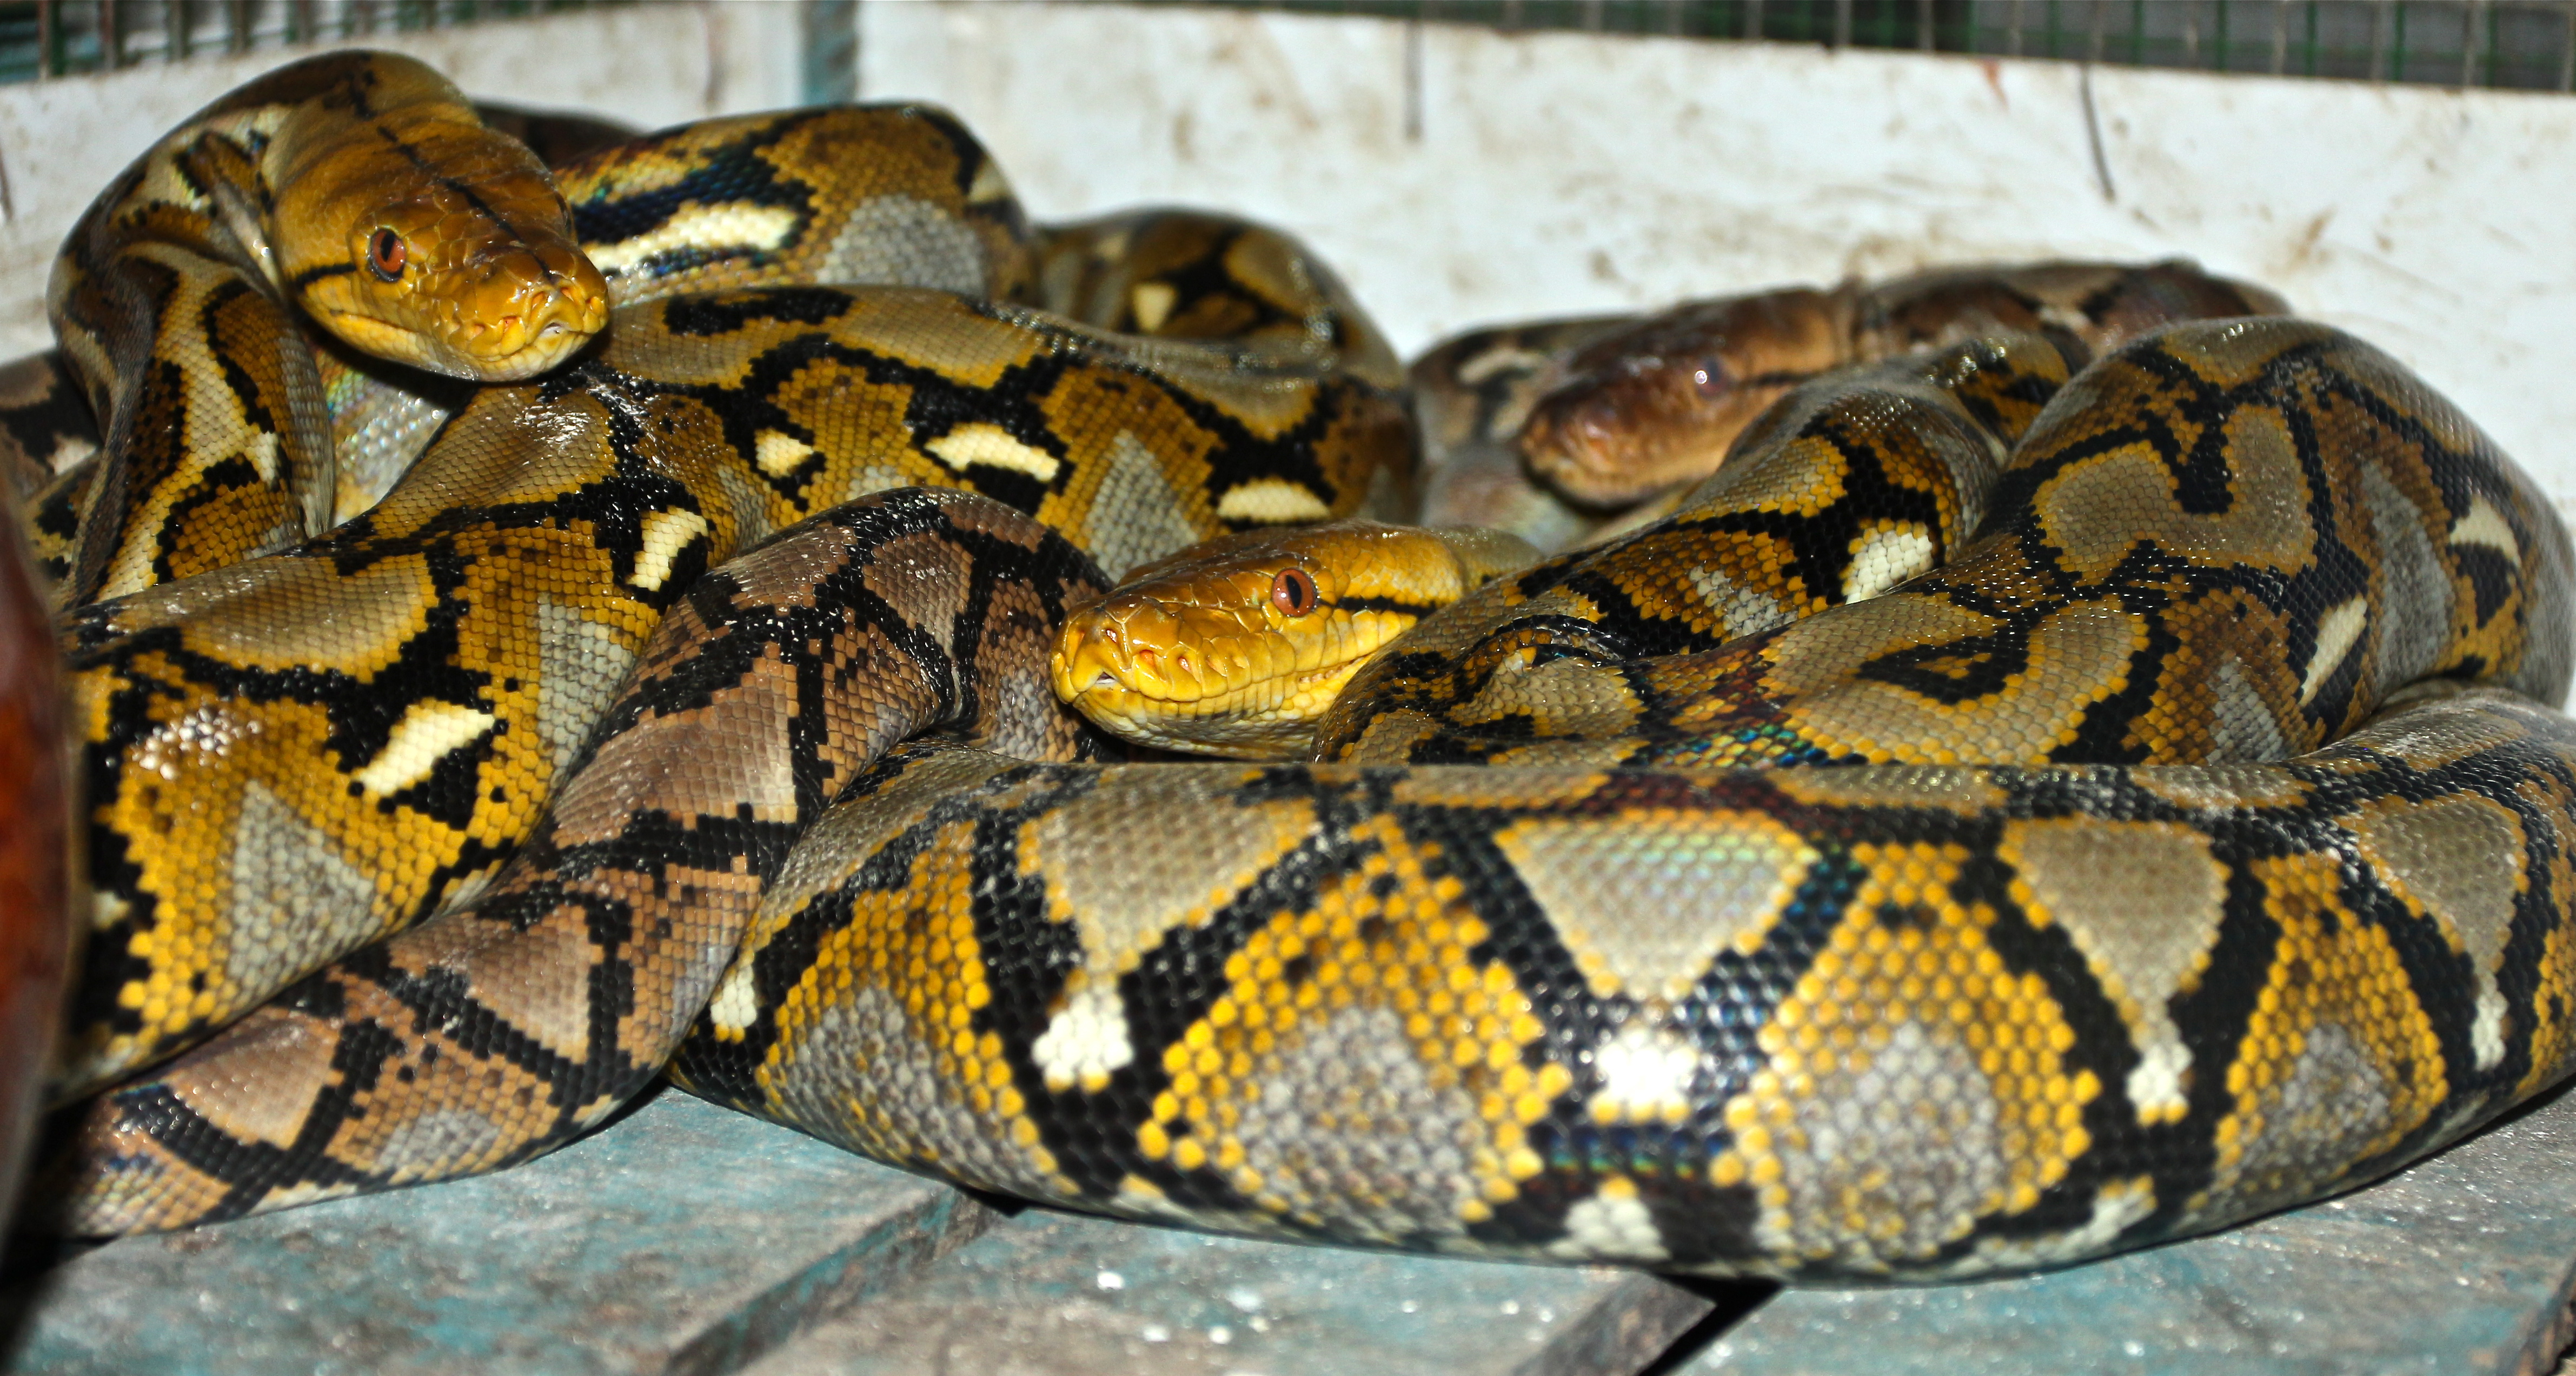 Within the last 20 years, the scale of trade in python skins has increased significantly with nearly 500,000 skins exported from Southeast Asian countries per year.